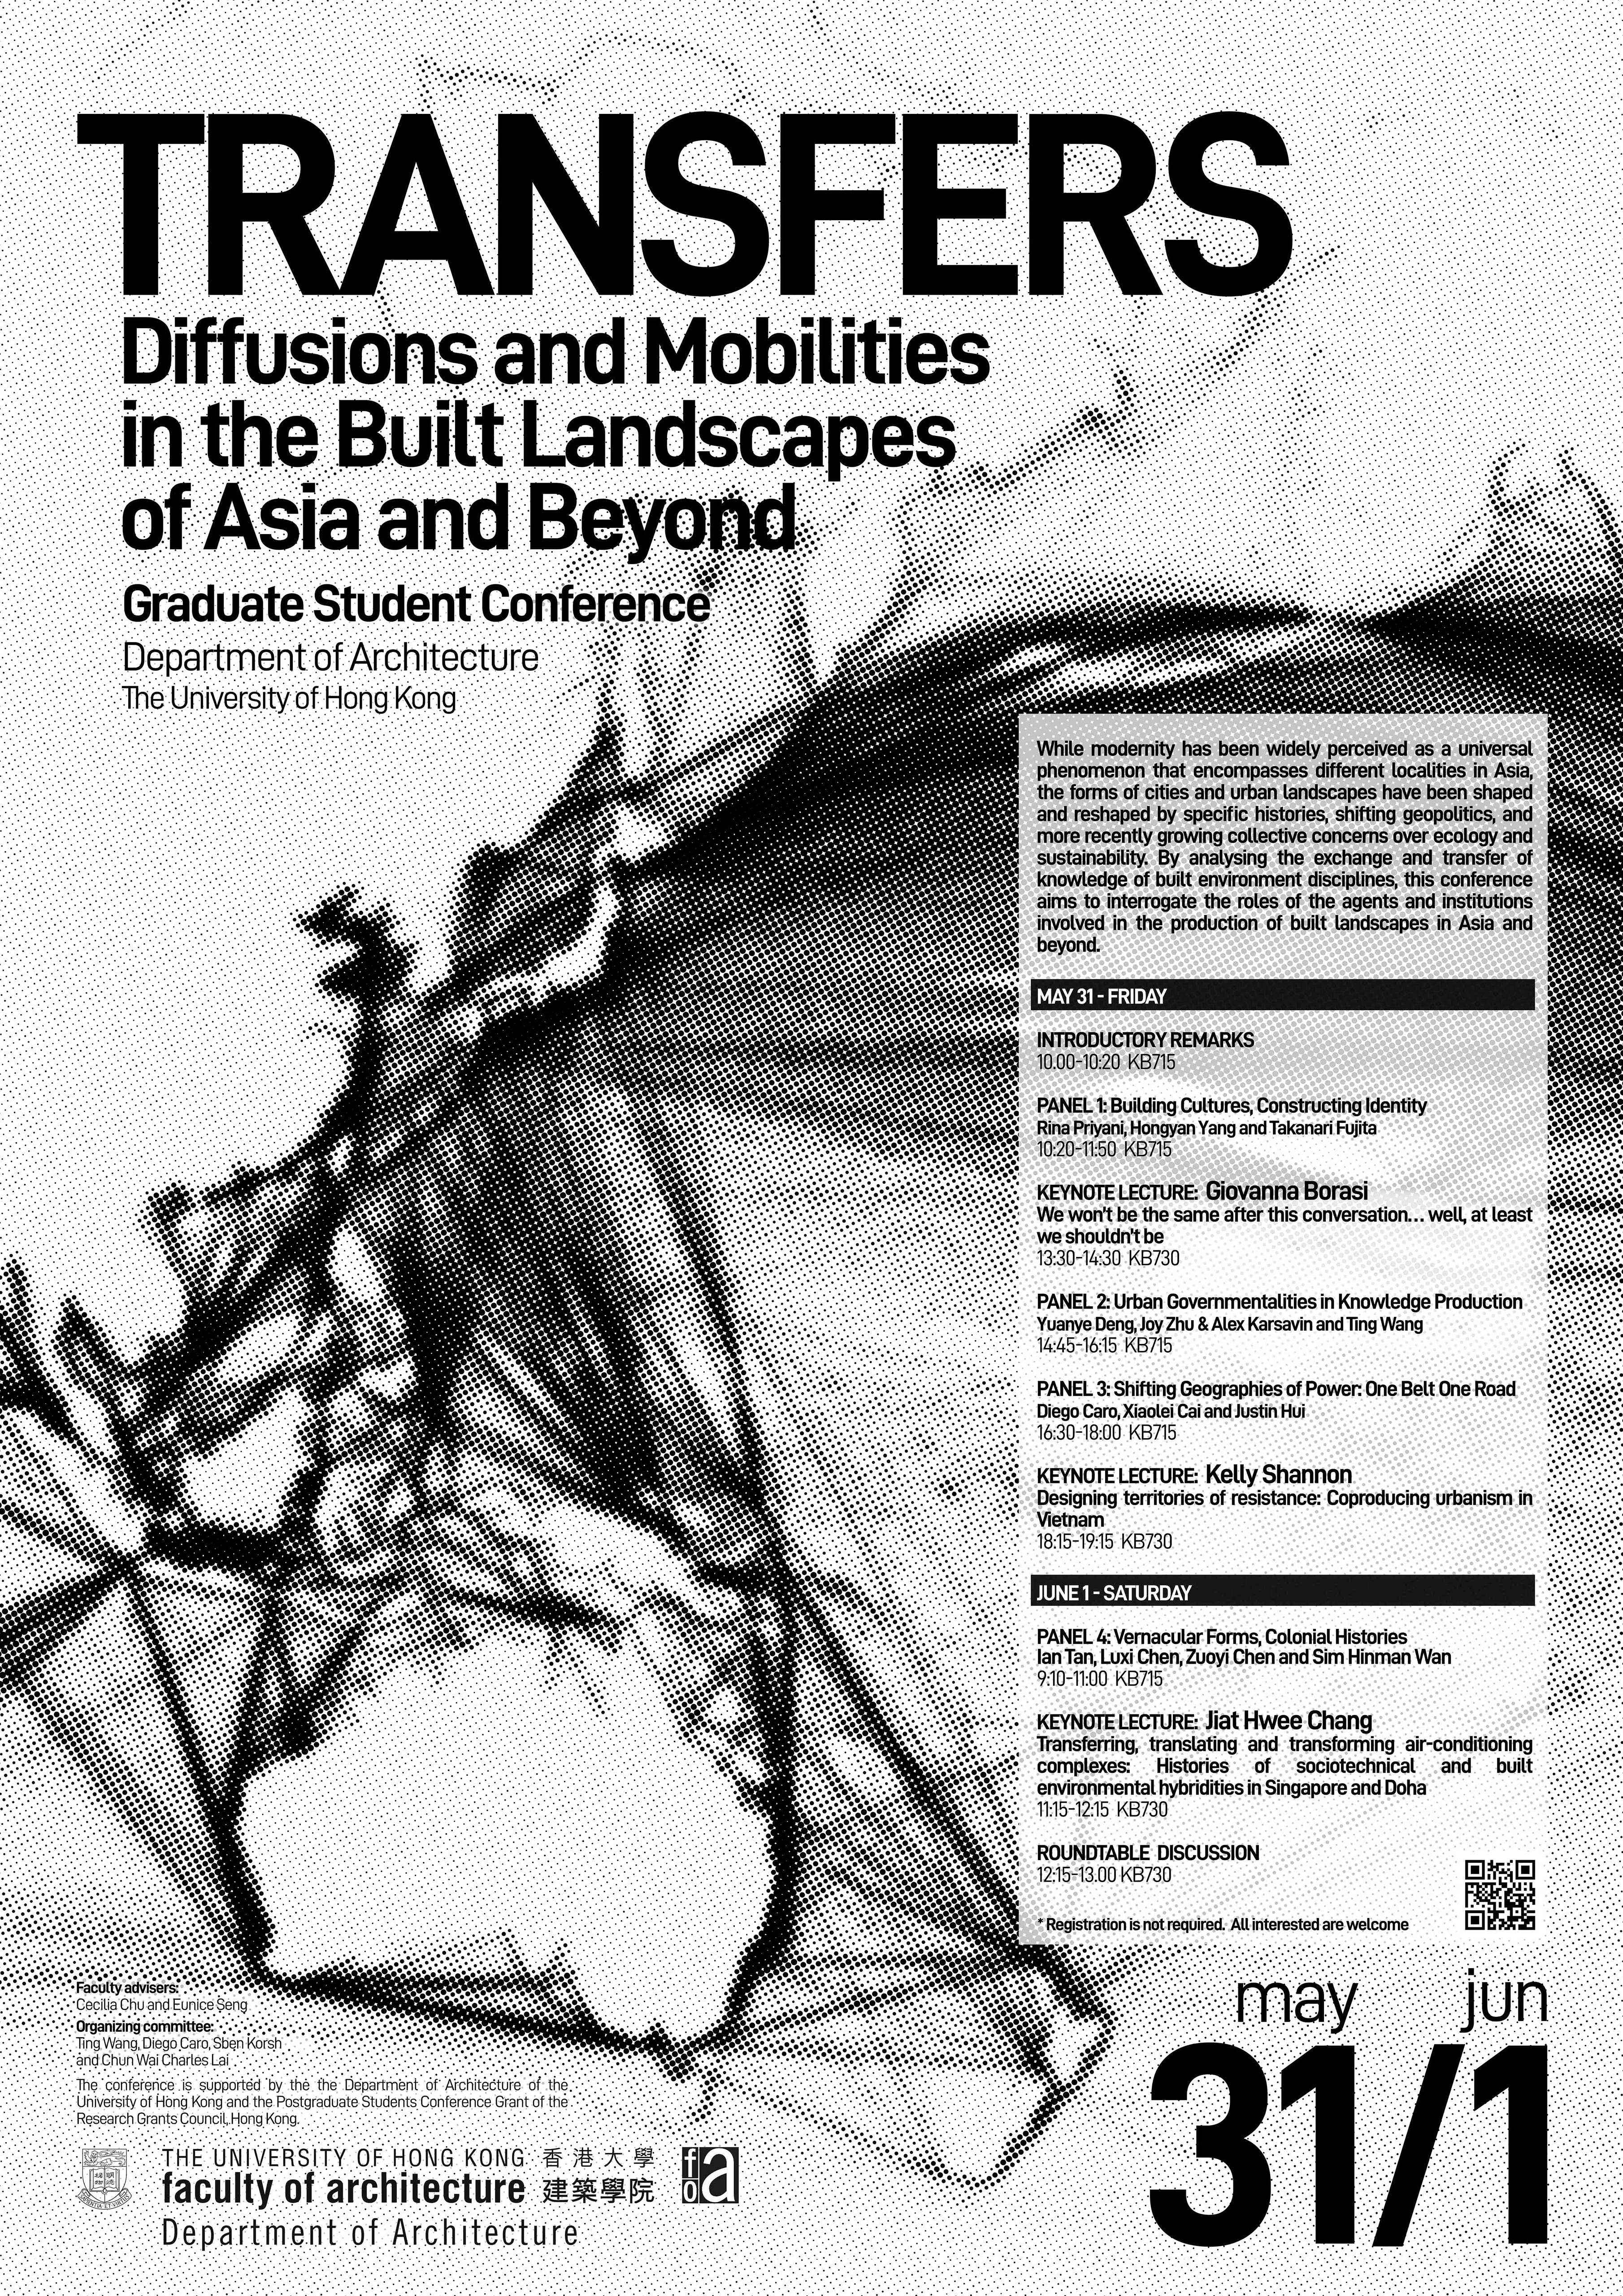 TRANSFER: Diffusions and Mobilities in the Built Landscapes of Asia and beyond